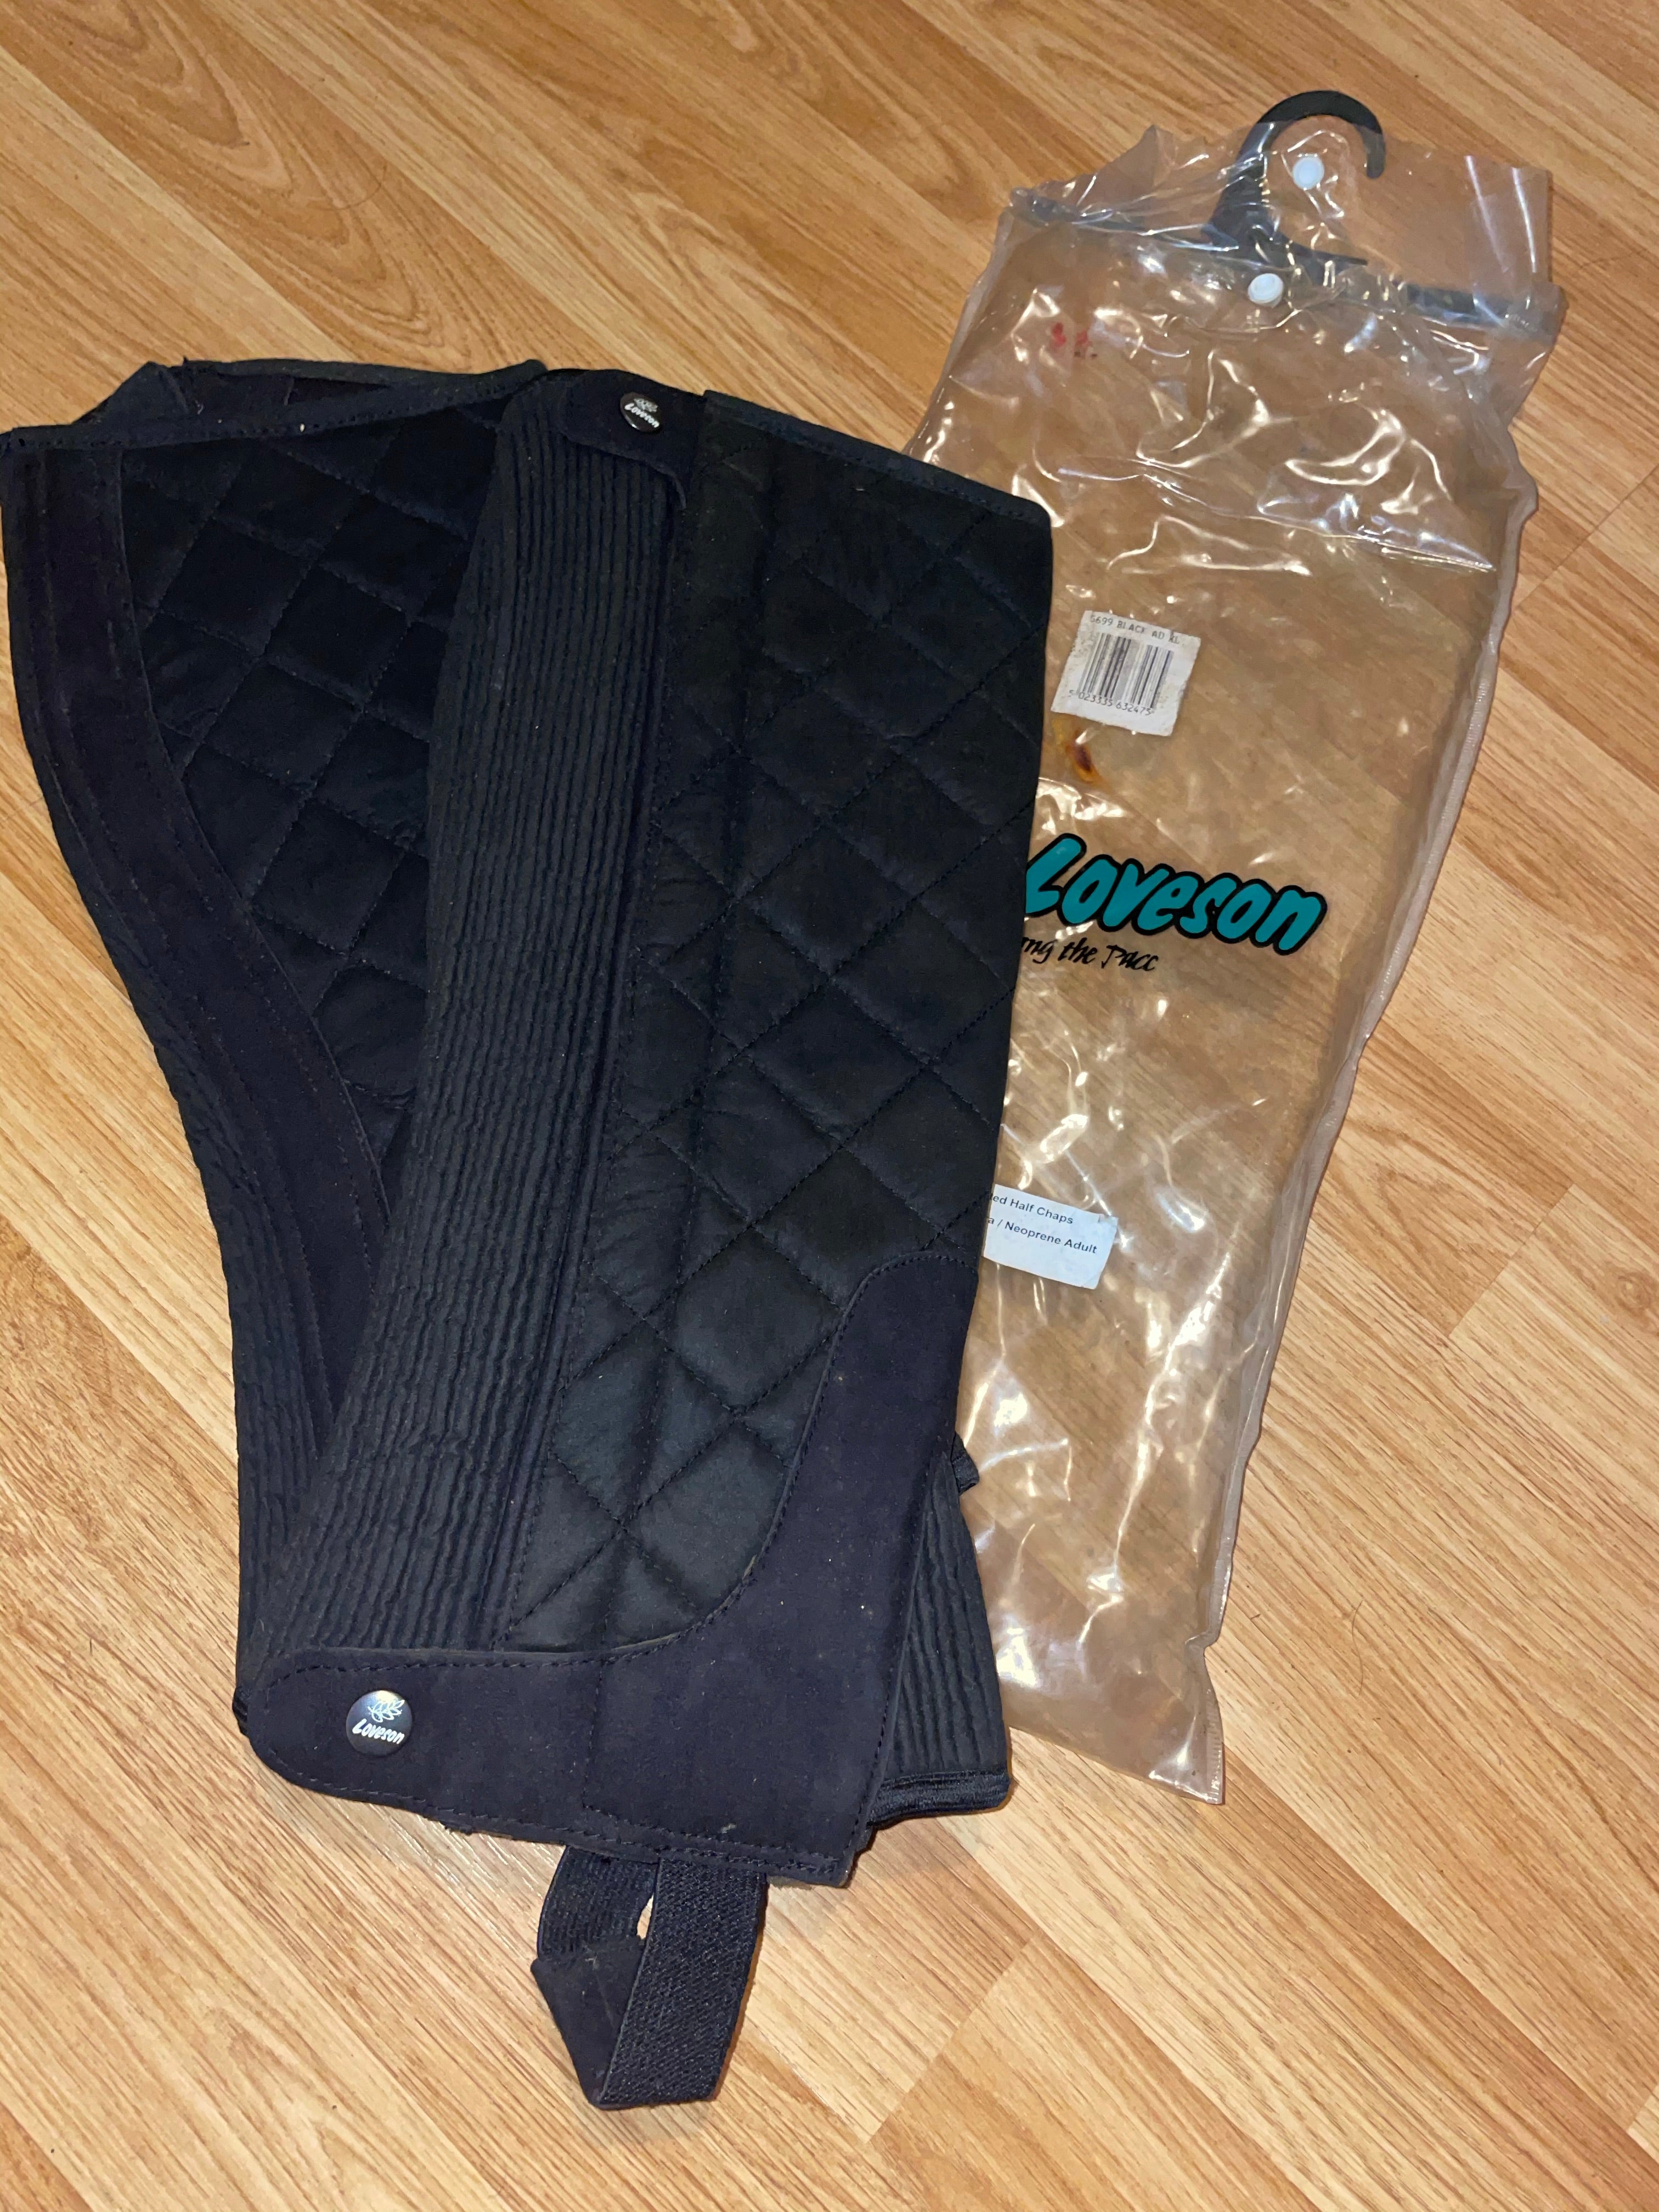 Loveson Amara Quilted Half Chaps - XL - Free Delivery 📦